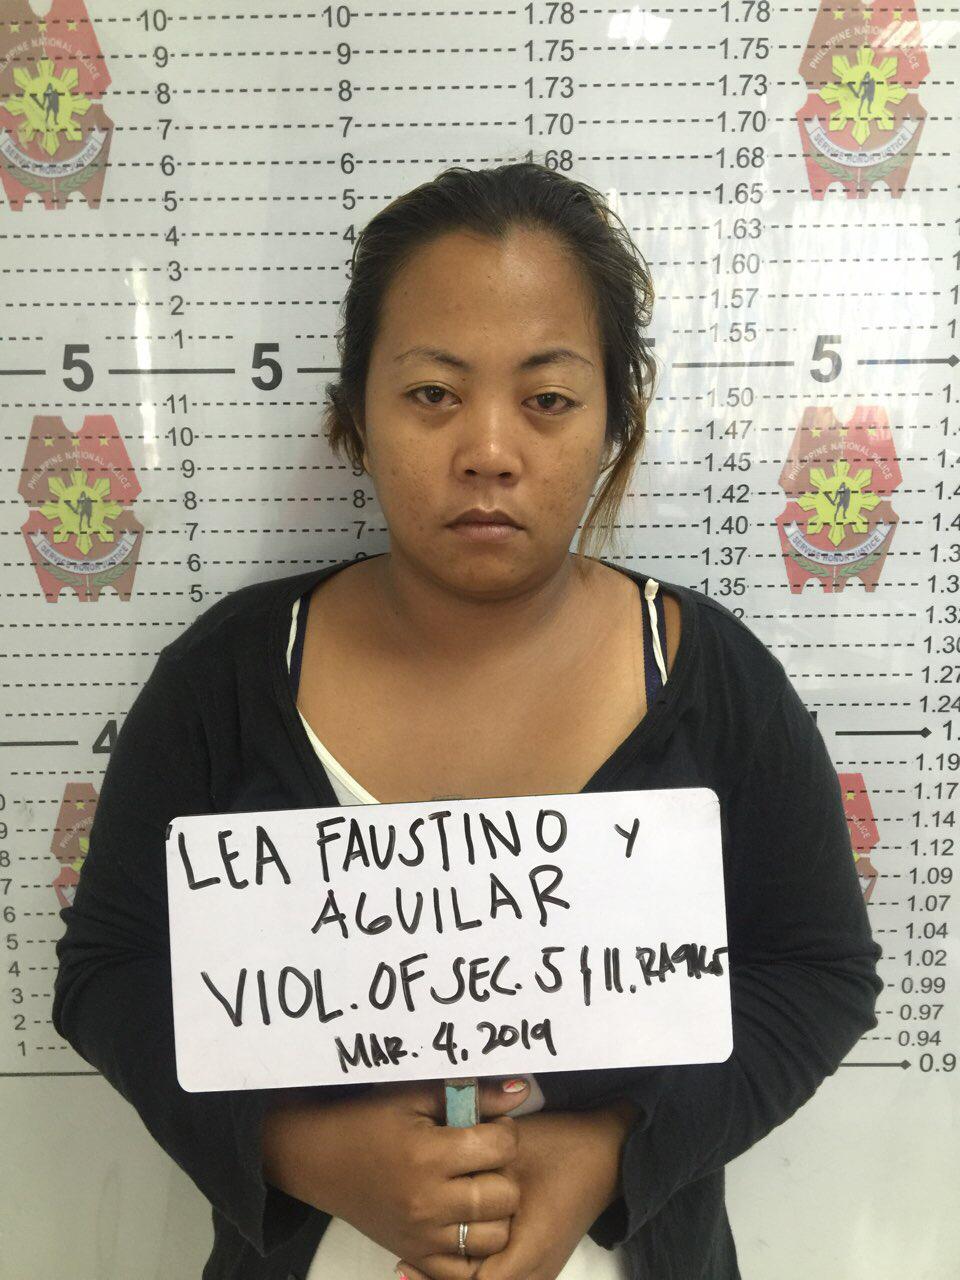 Prison visitor ends up in jail for yielding bread stuffed with ‘shabu’ in QC